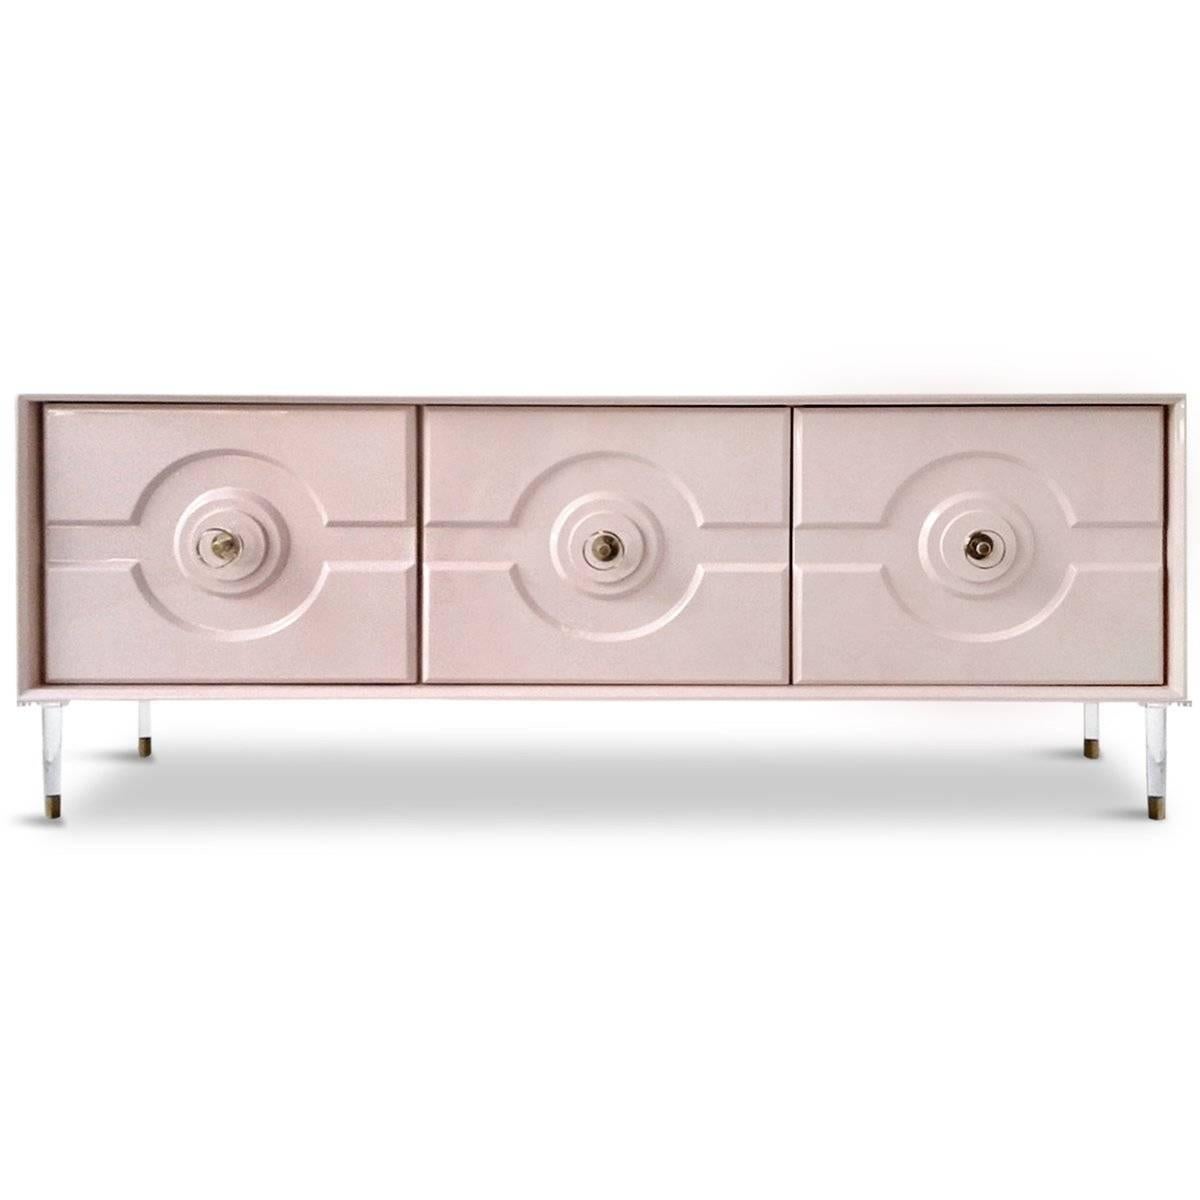 Introducing the Sorrento 3 Door Credenza. Featuring a bold geometric design, tapered lucite legs, and round lucite pulls, this striking piece is the perfect way to hide away clutter and add style to any room. 

Dimensions:
72